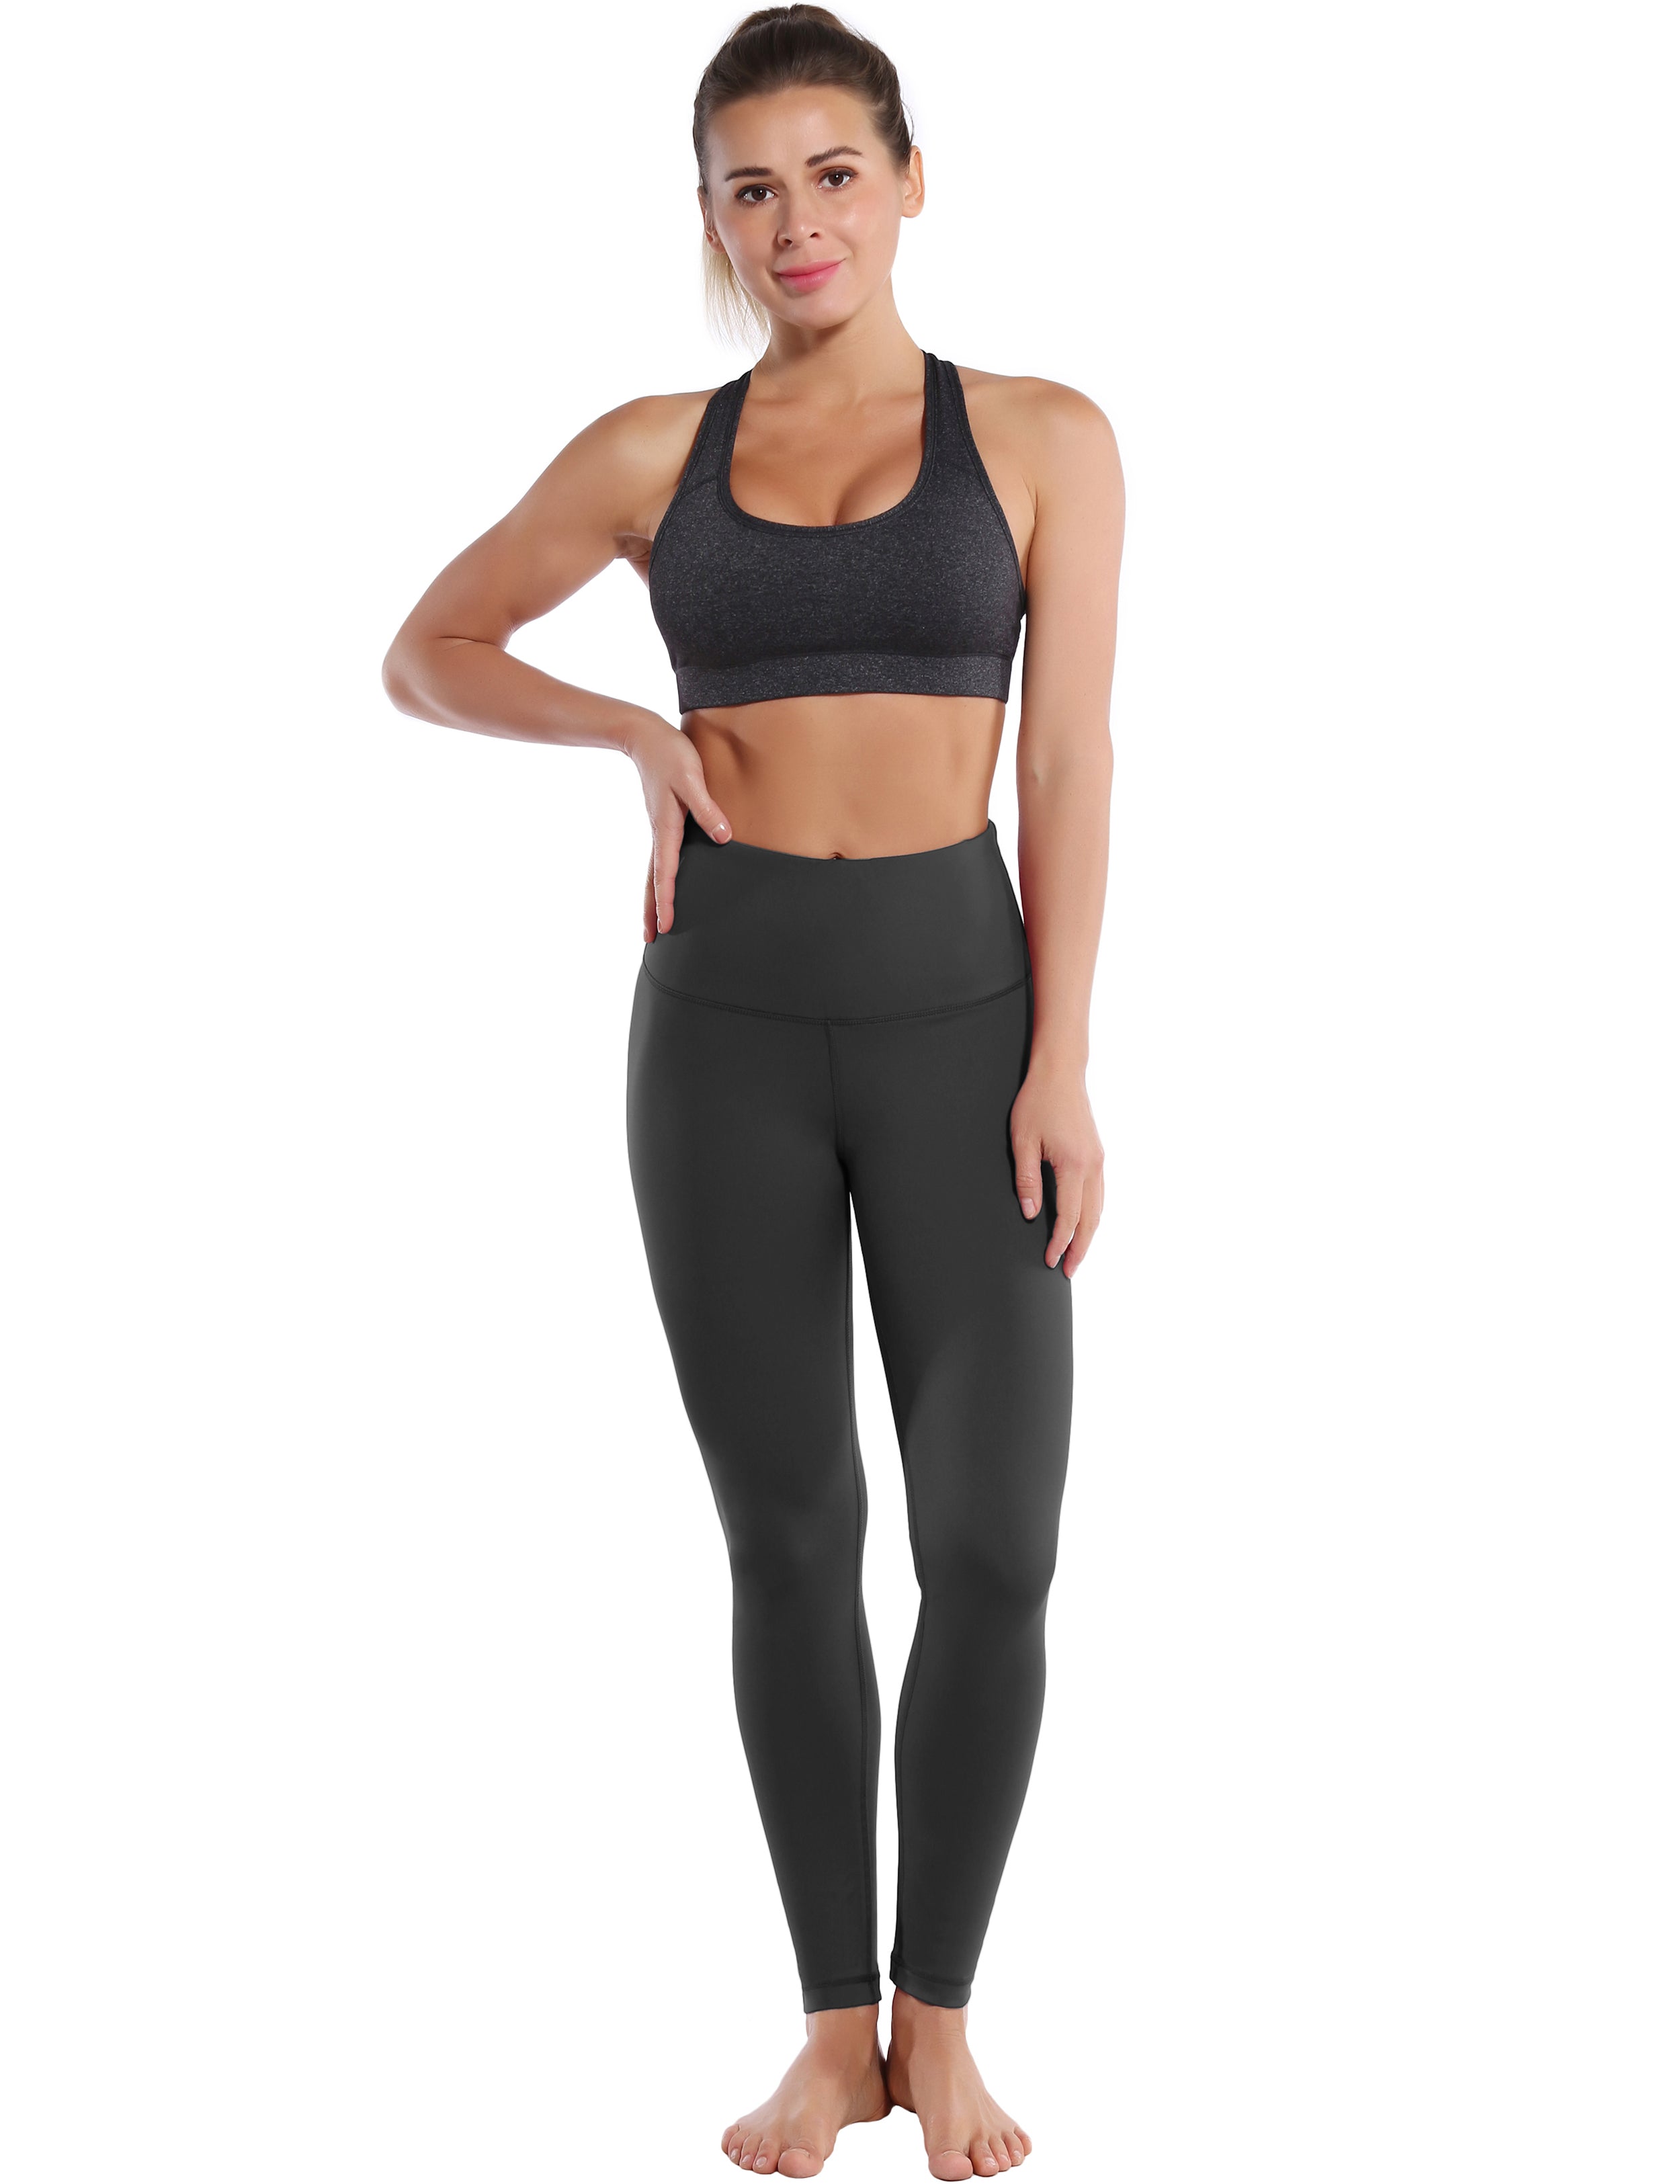 High Waist Pilates Pants shadowcharcoal 75%Nylon/25%Spandex Fabric doesn't attract lint easily 4-way stretch No see-through Moisture-wicking Tummy control Inner pocket Four lengths